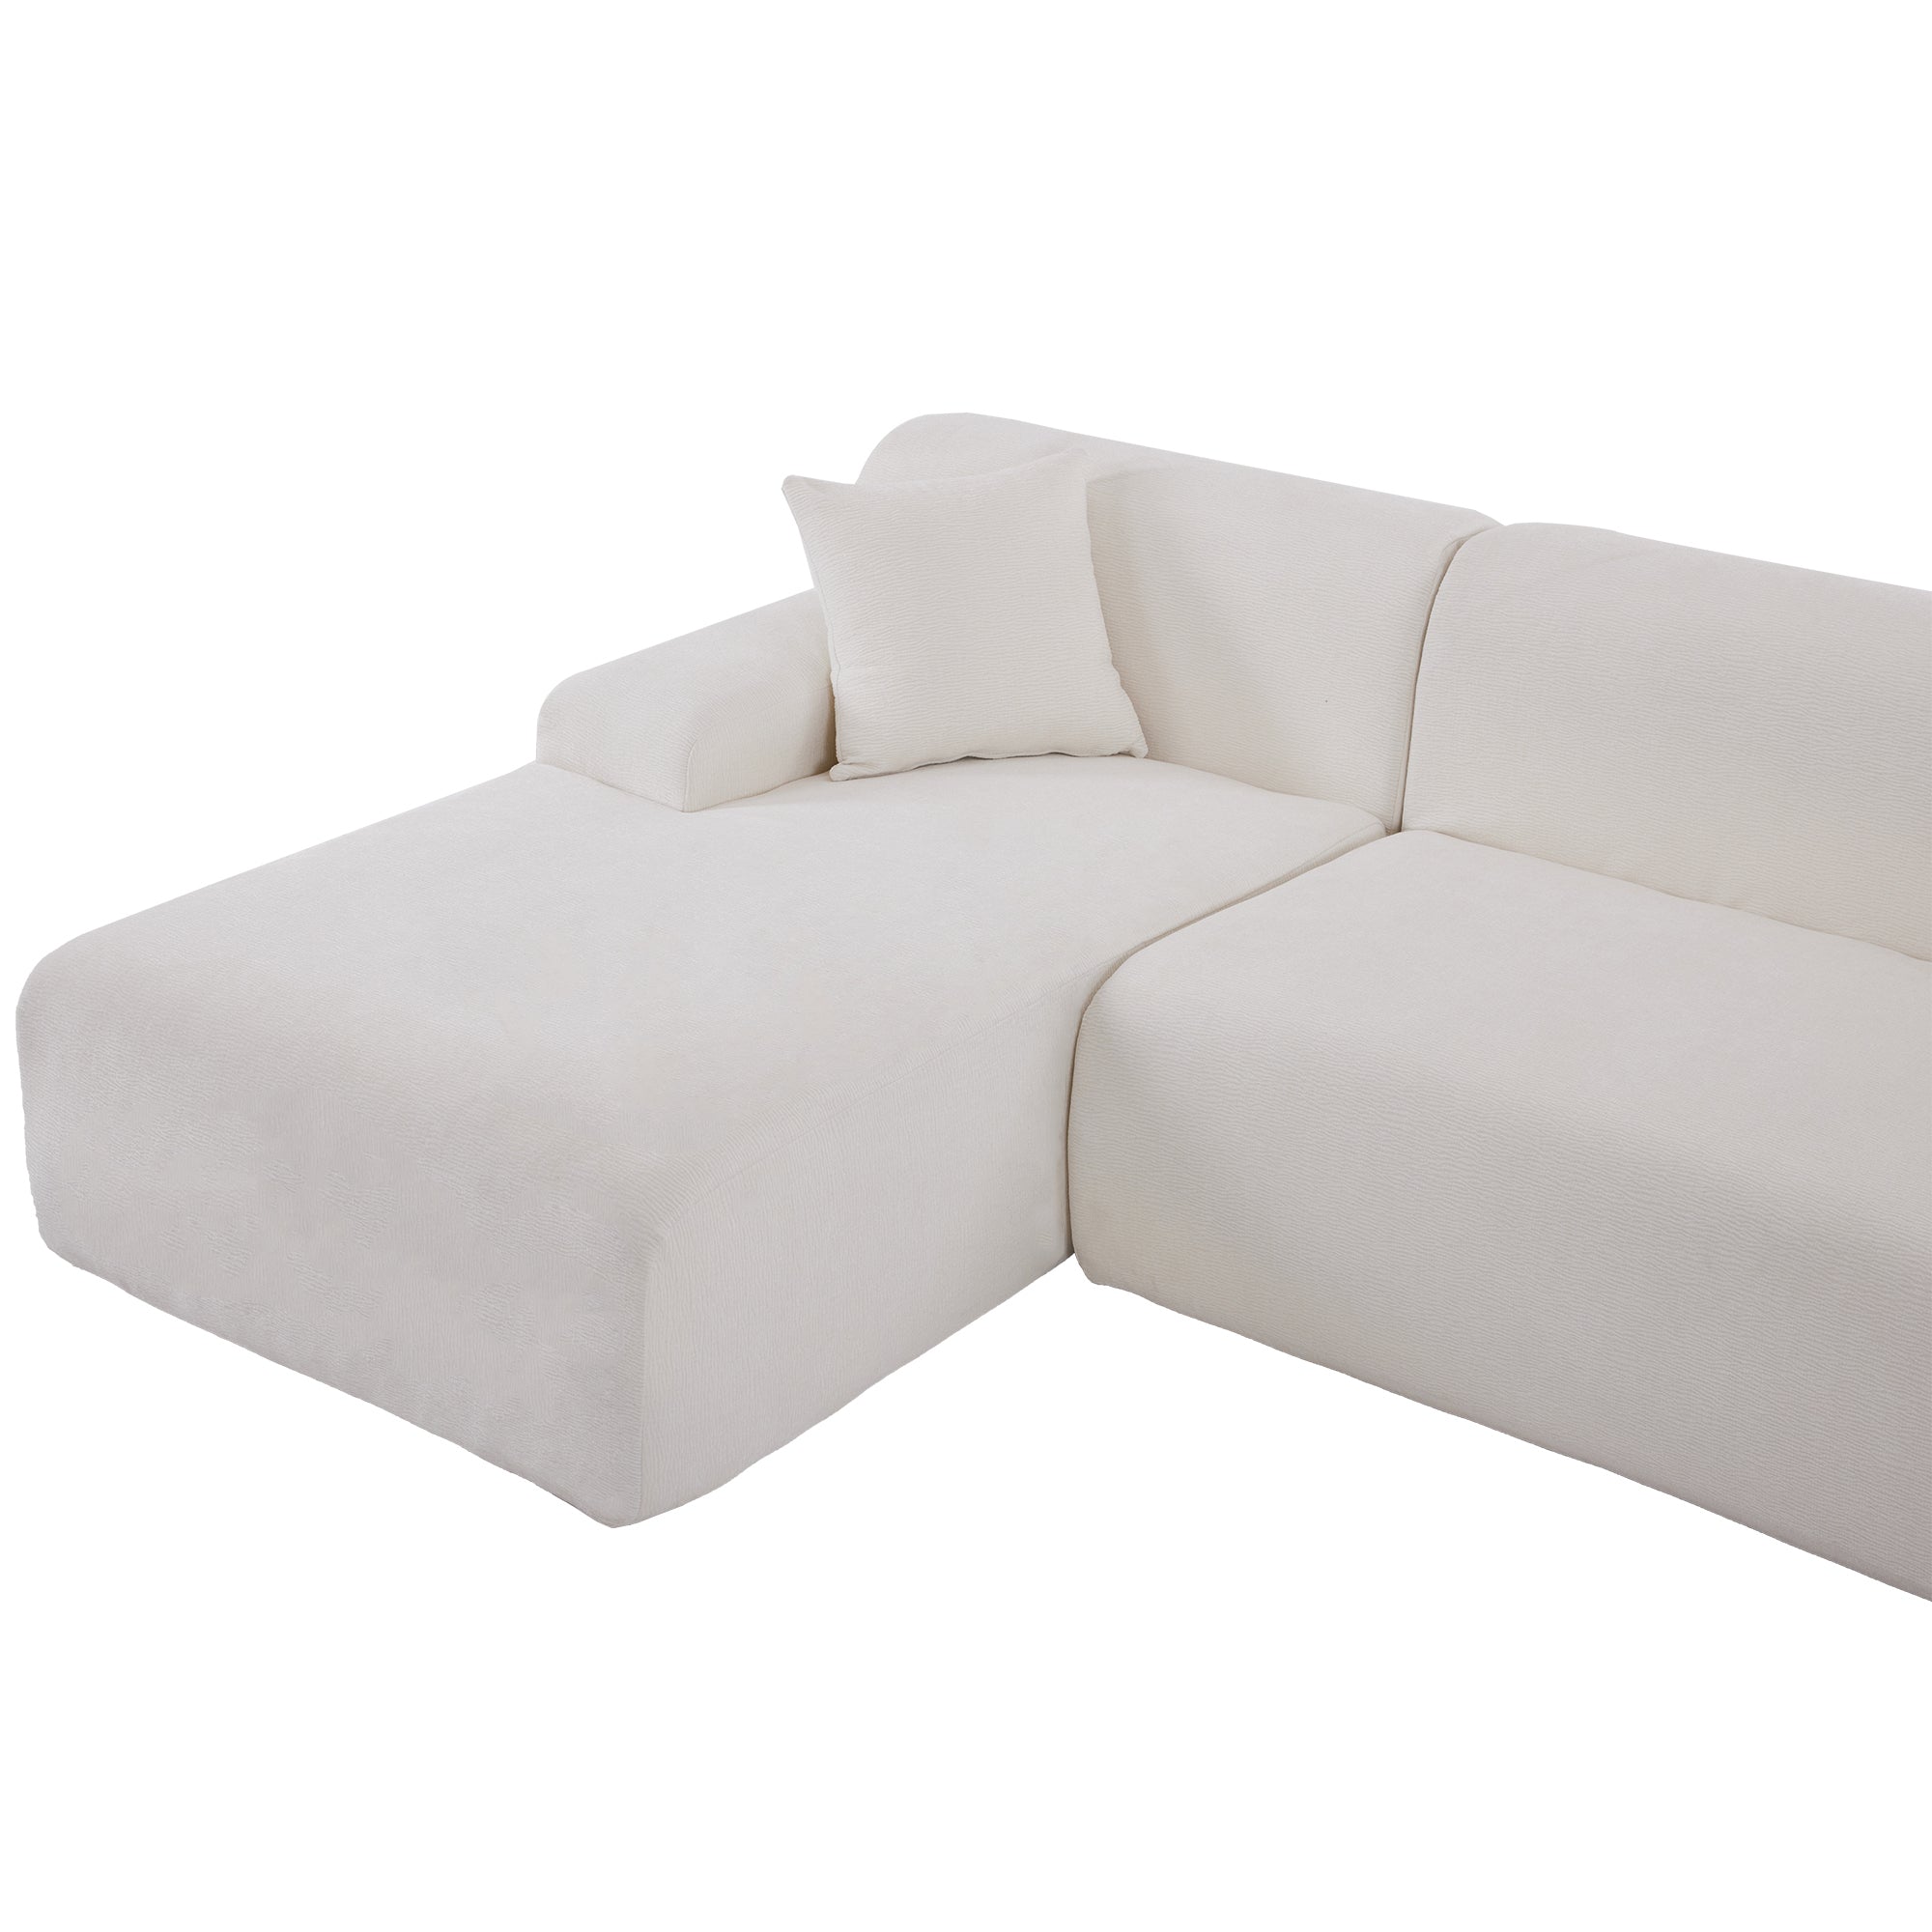 Modern Large L-Shape Modular Sectional Sofa 2  Piece Free Combination Simplified Style - Beige